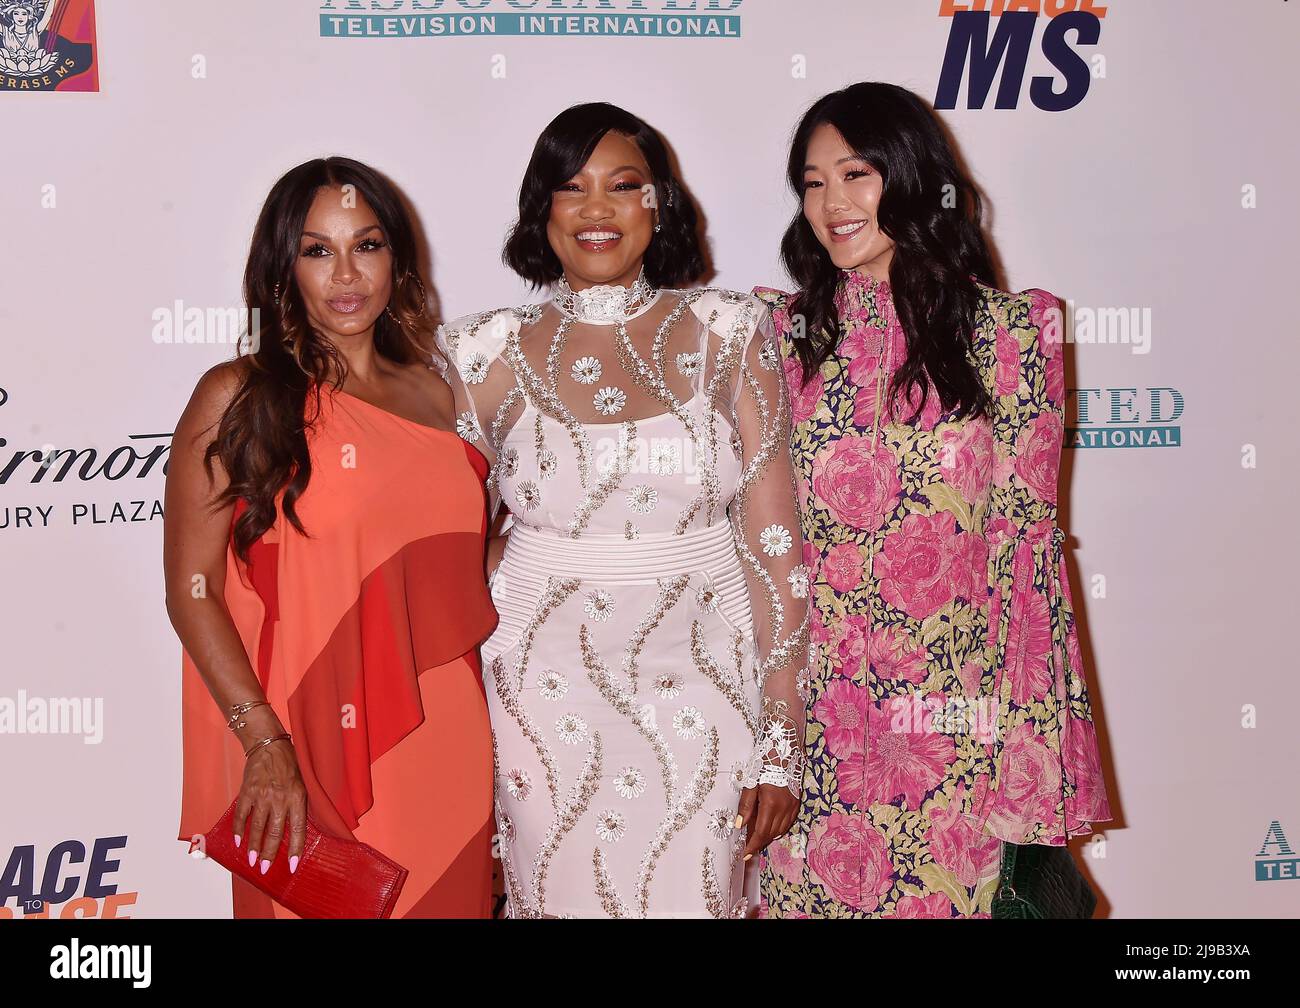 LOS ANGELES, CA - MAY 20: (L-R) Sheree Zampino, Garcelle Beauvais and Crystal Kung Minkoff attend the 29th Annual Race To Erase MS Gala at the Fairmon Stock Photo